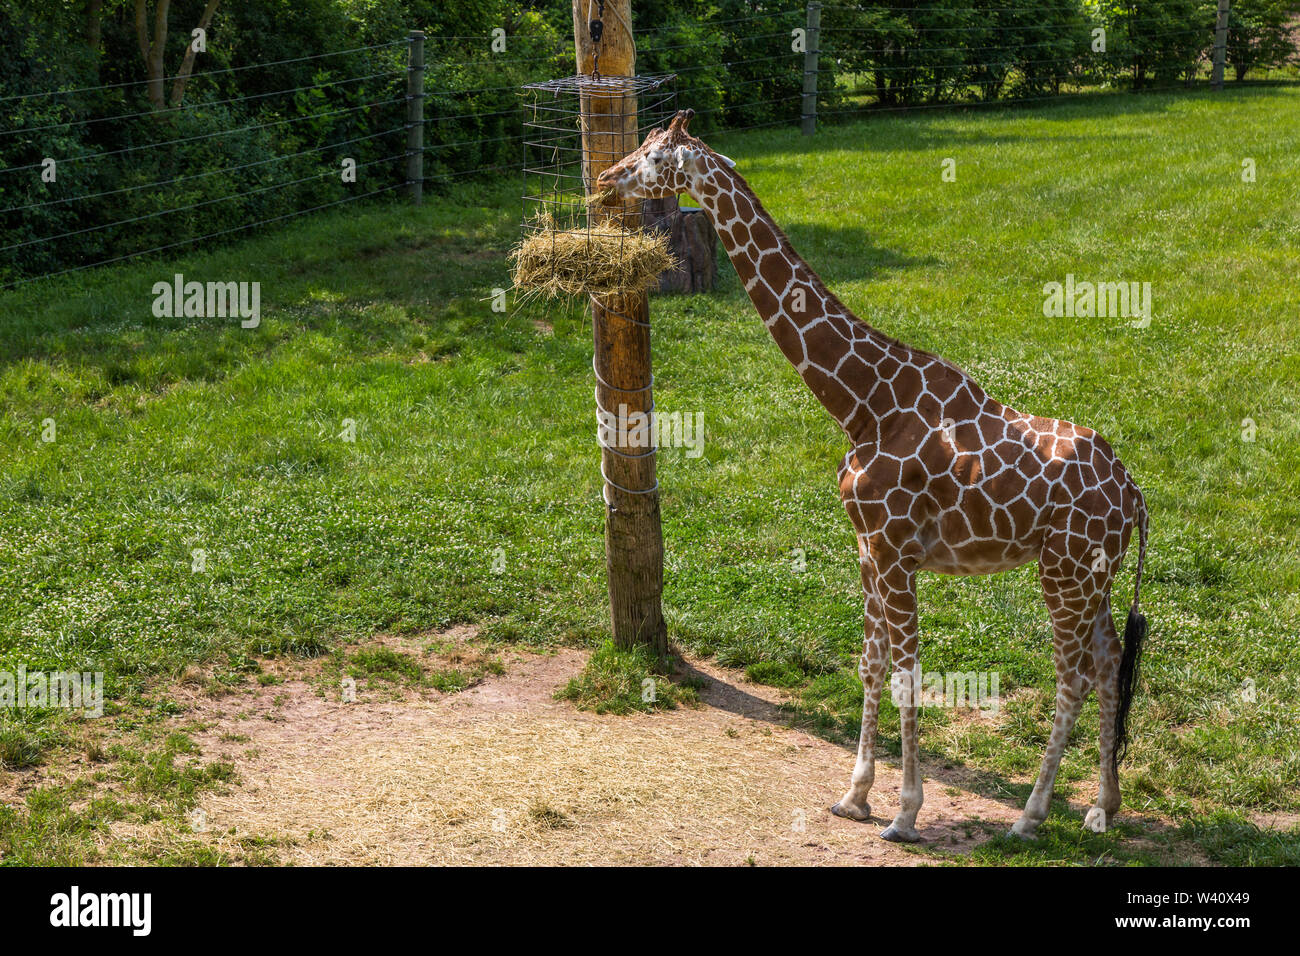 A hungry reticulated giraffe eats his elevated dinner while in an enclosure at the Fort Wayne Children's Zoo in Fort Wayne, Indiana, USA. Stock Photo